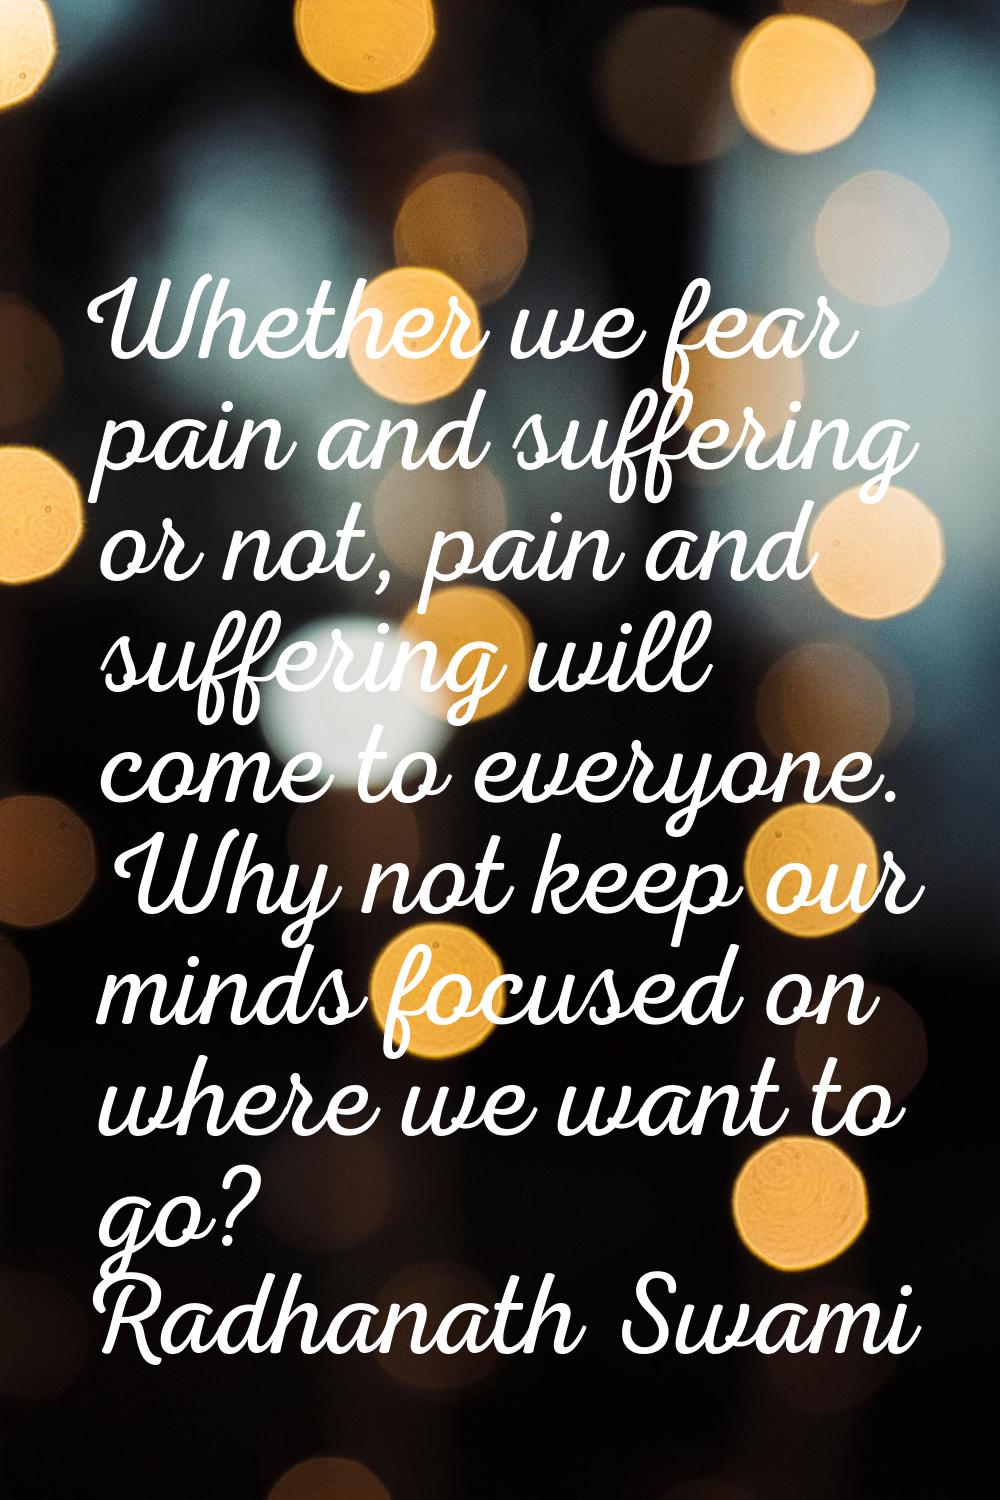 Whether we fear pain and suffering or not, pain and suffering will come to everyone. Why not keep o